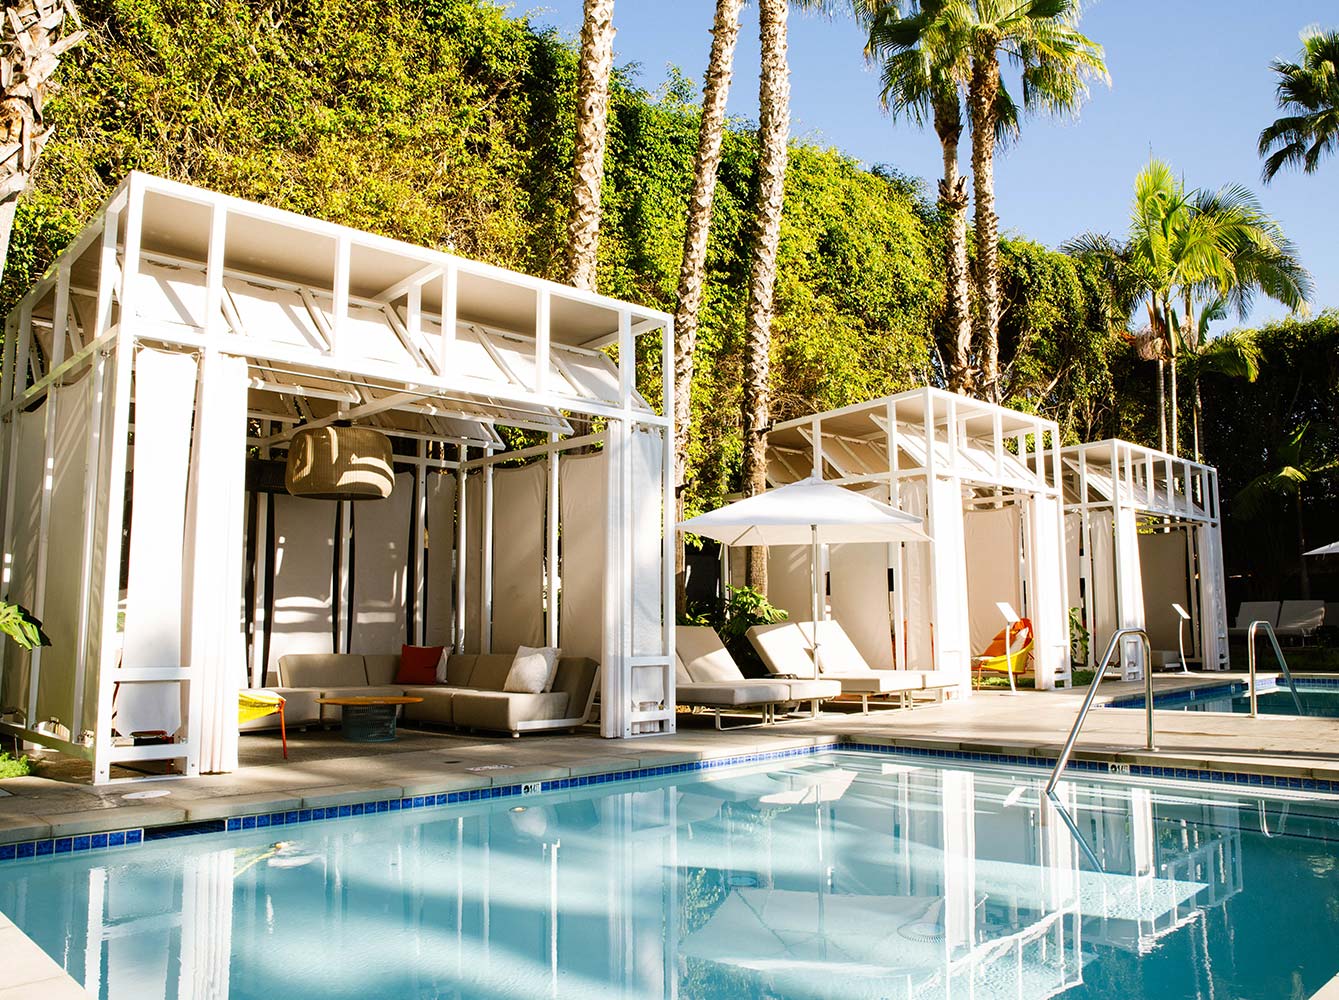 Hotels With Pools, Pool Cabanas